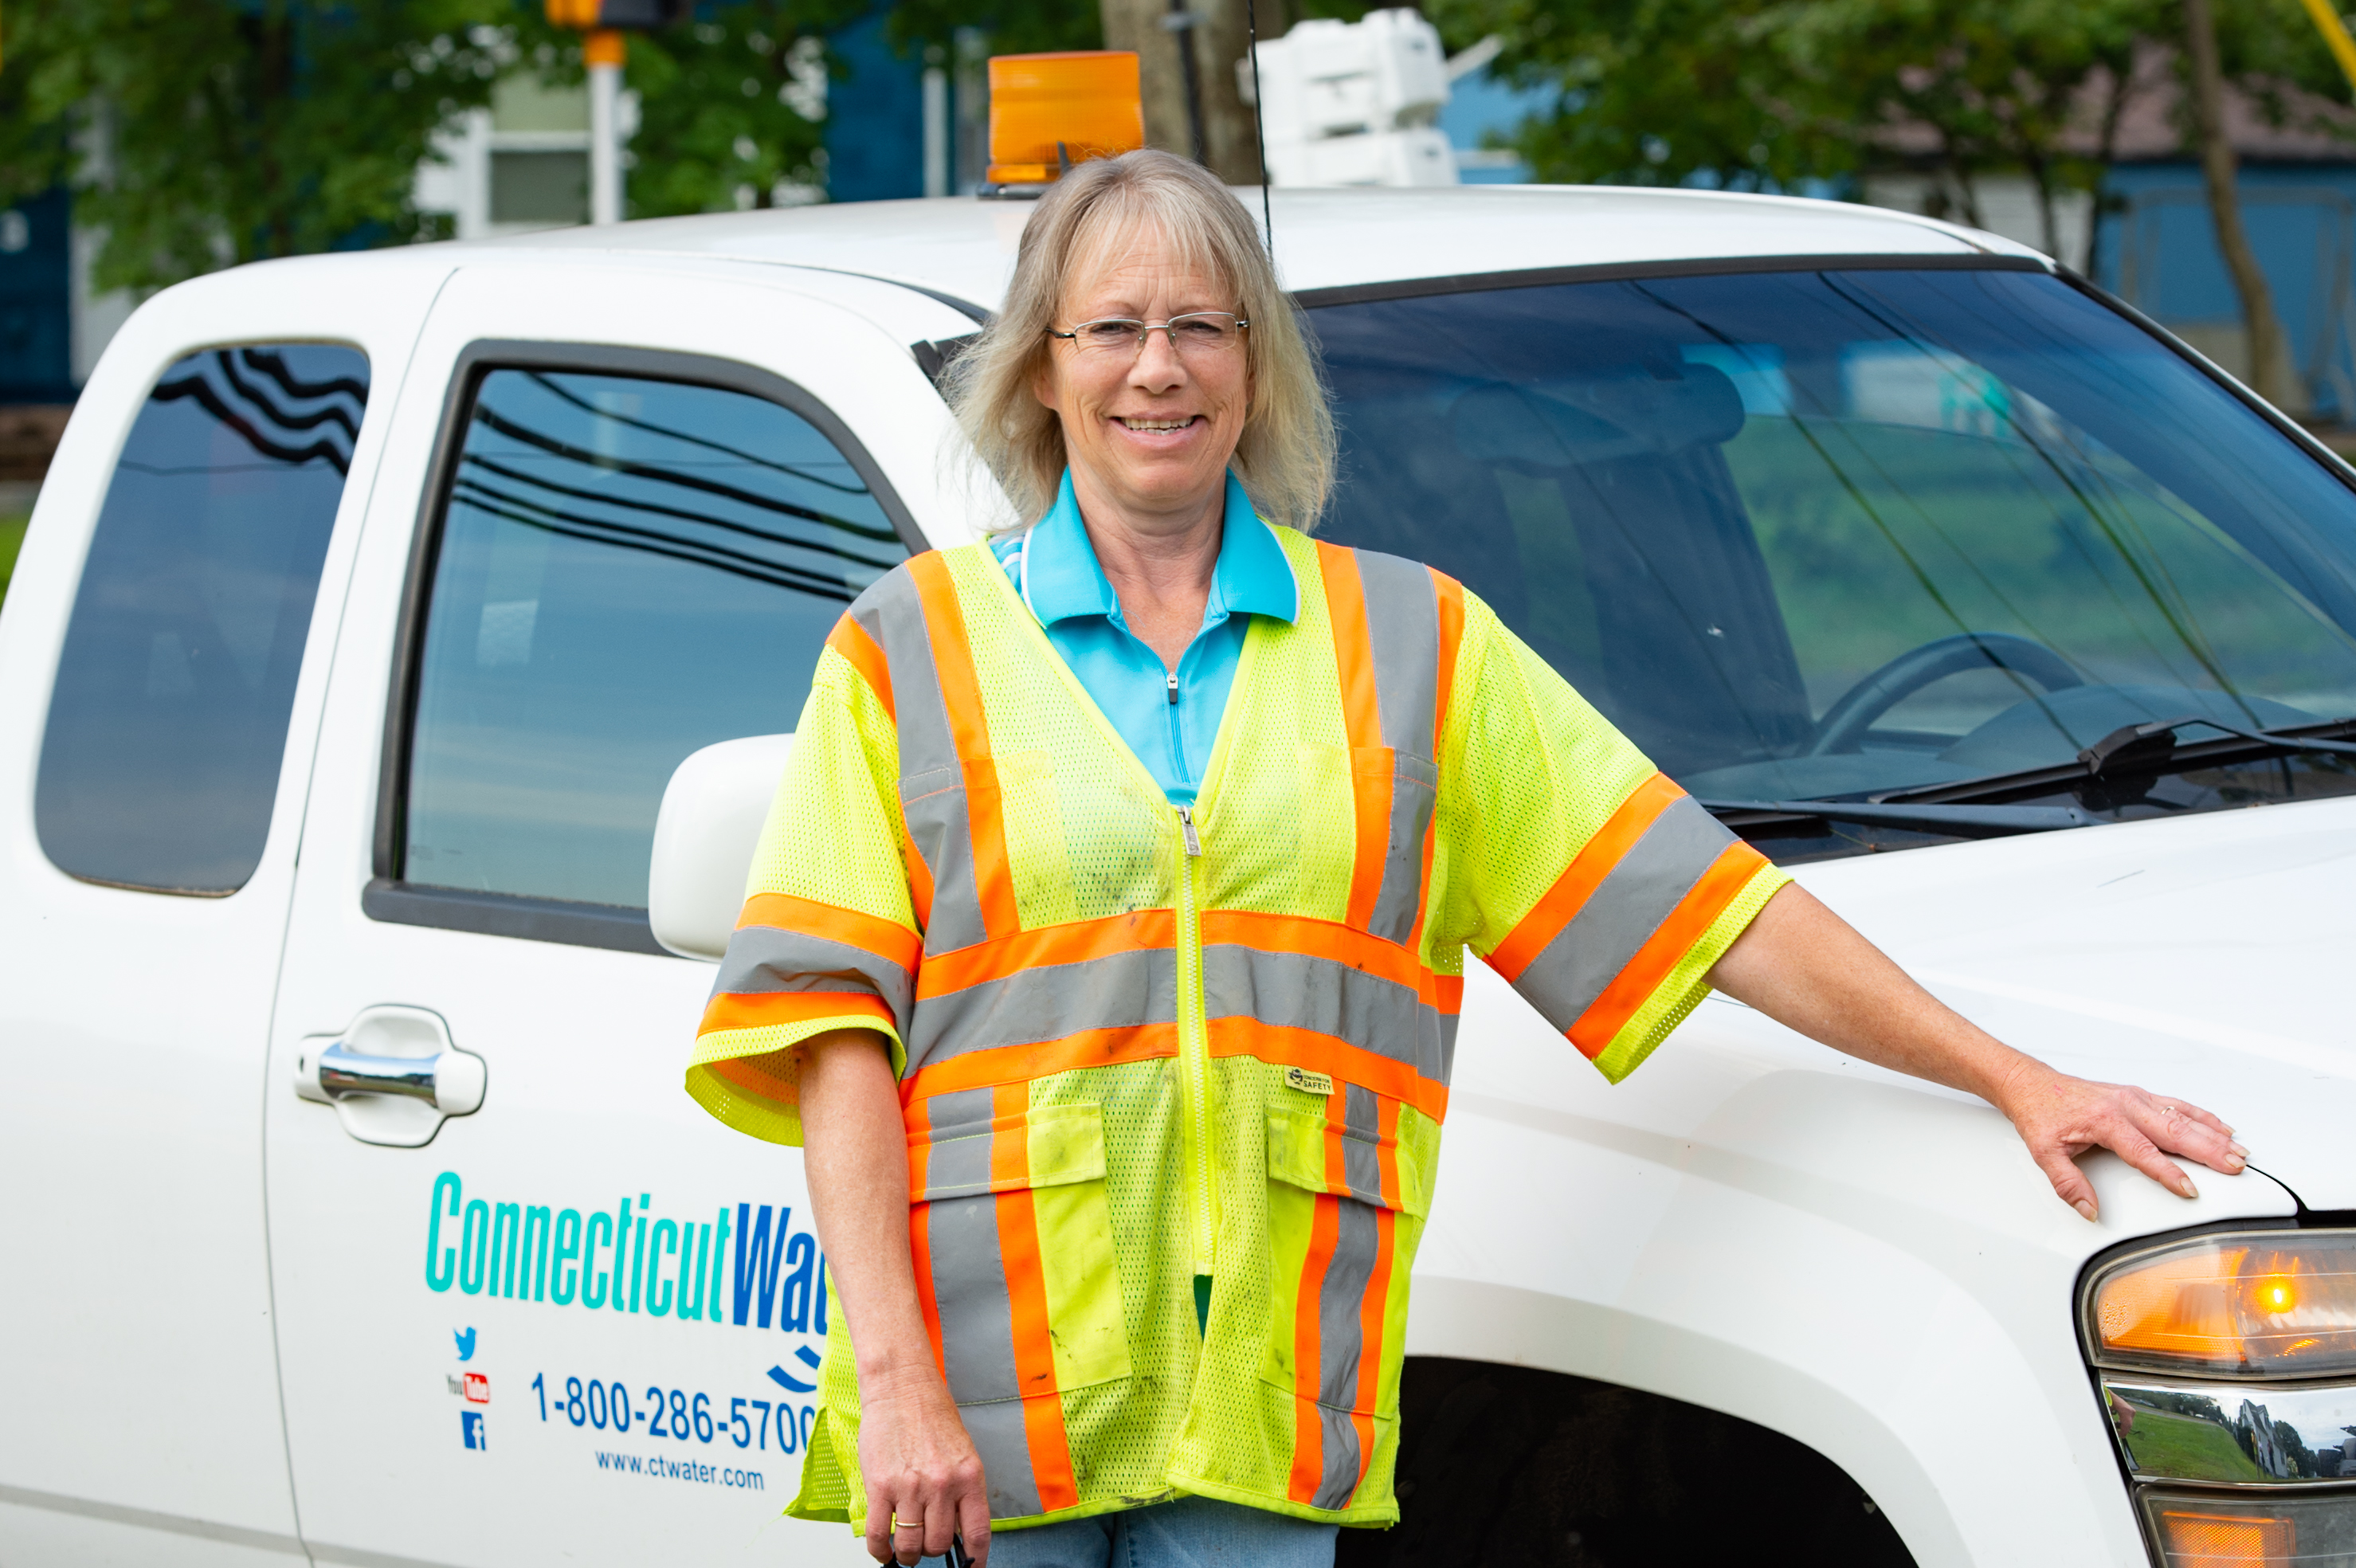 Connecticut Water employee standing in front of a service truck 